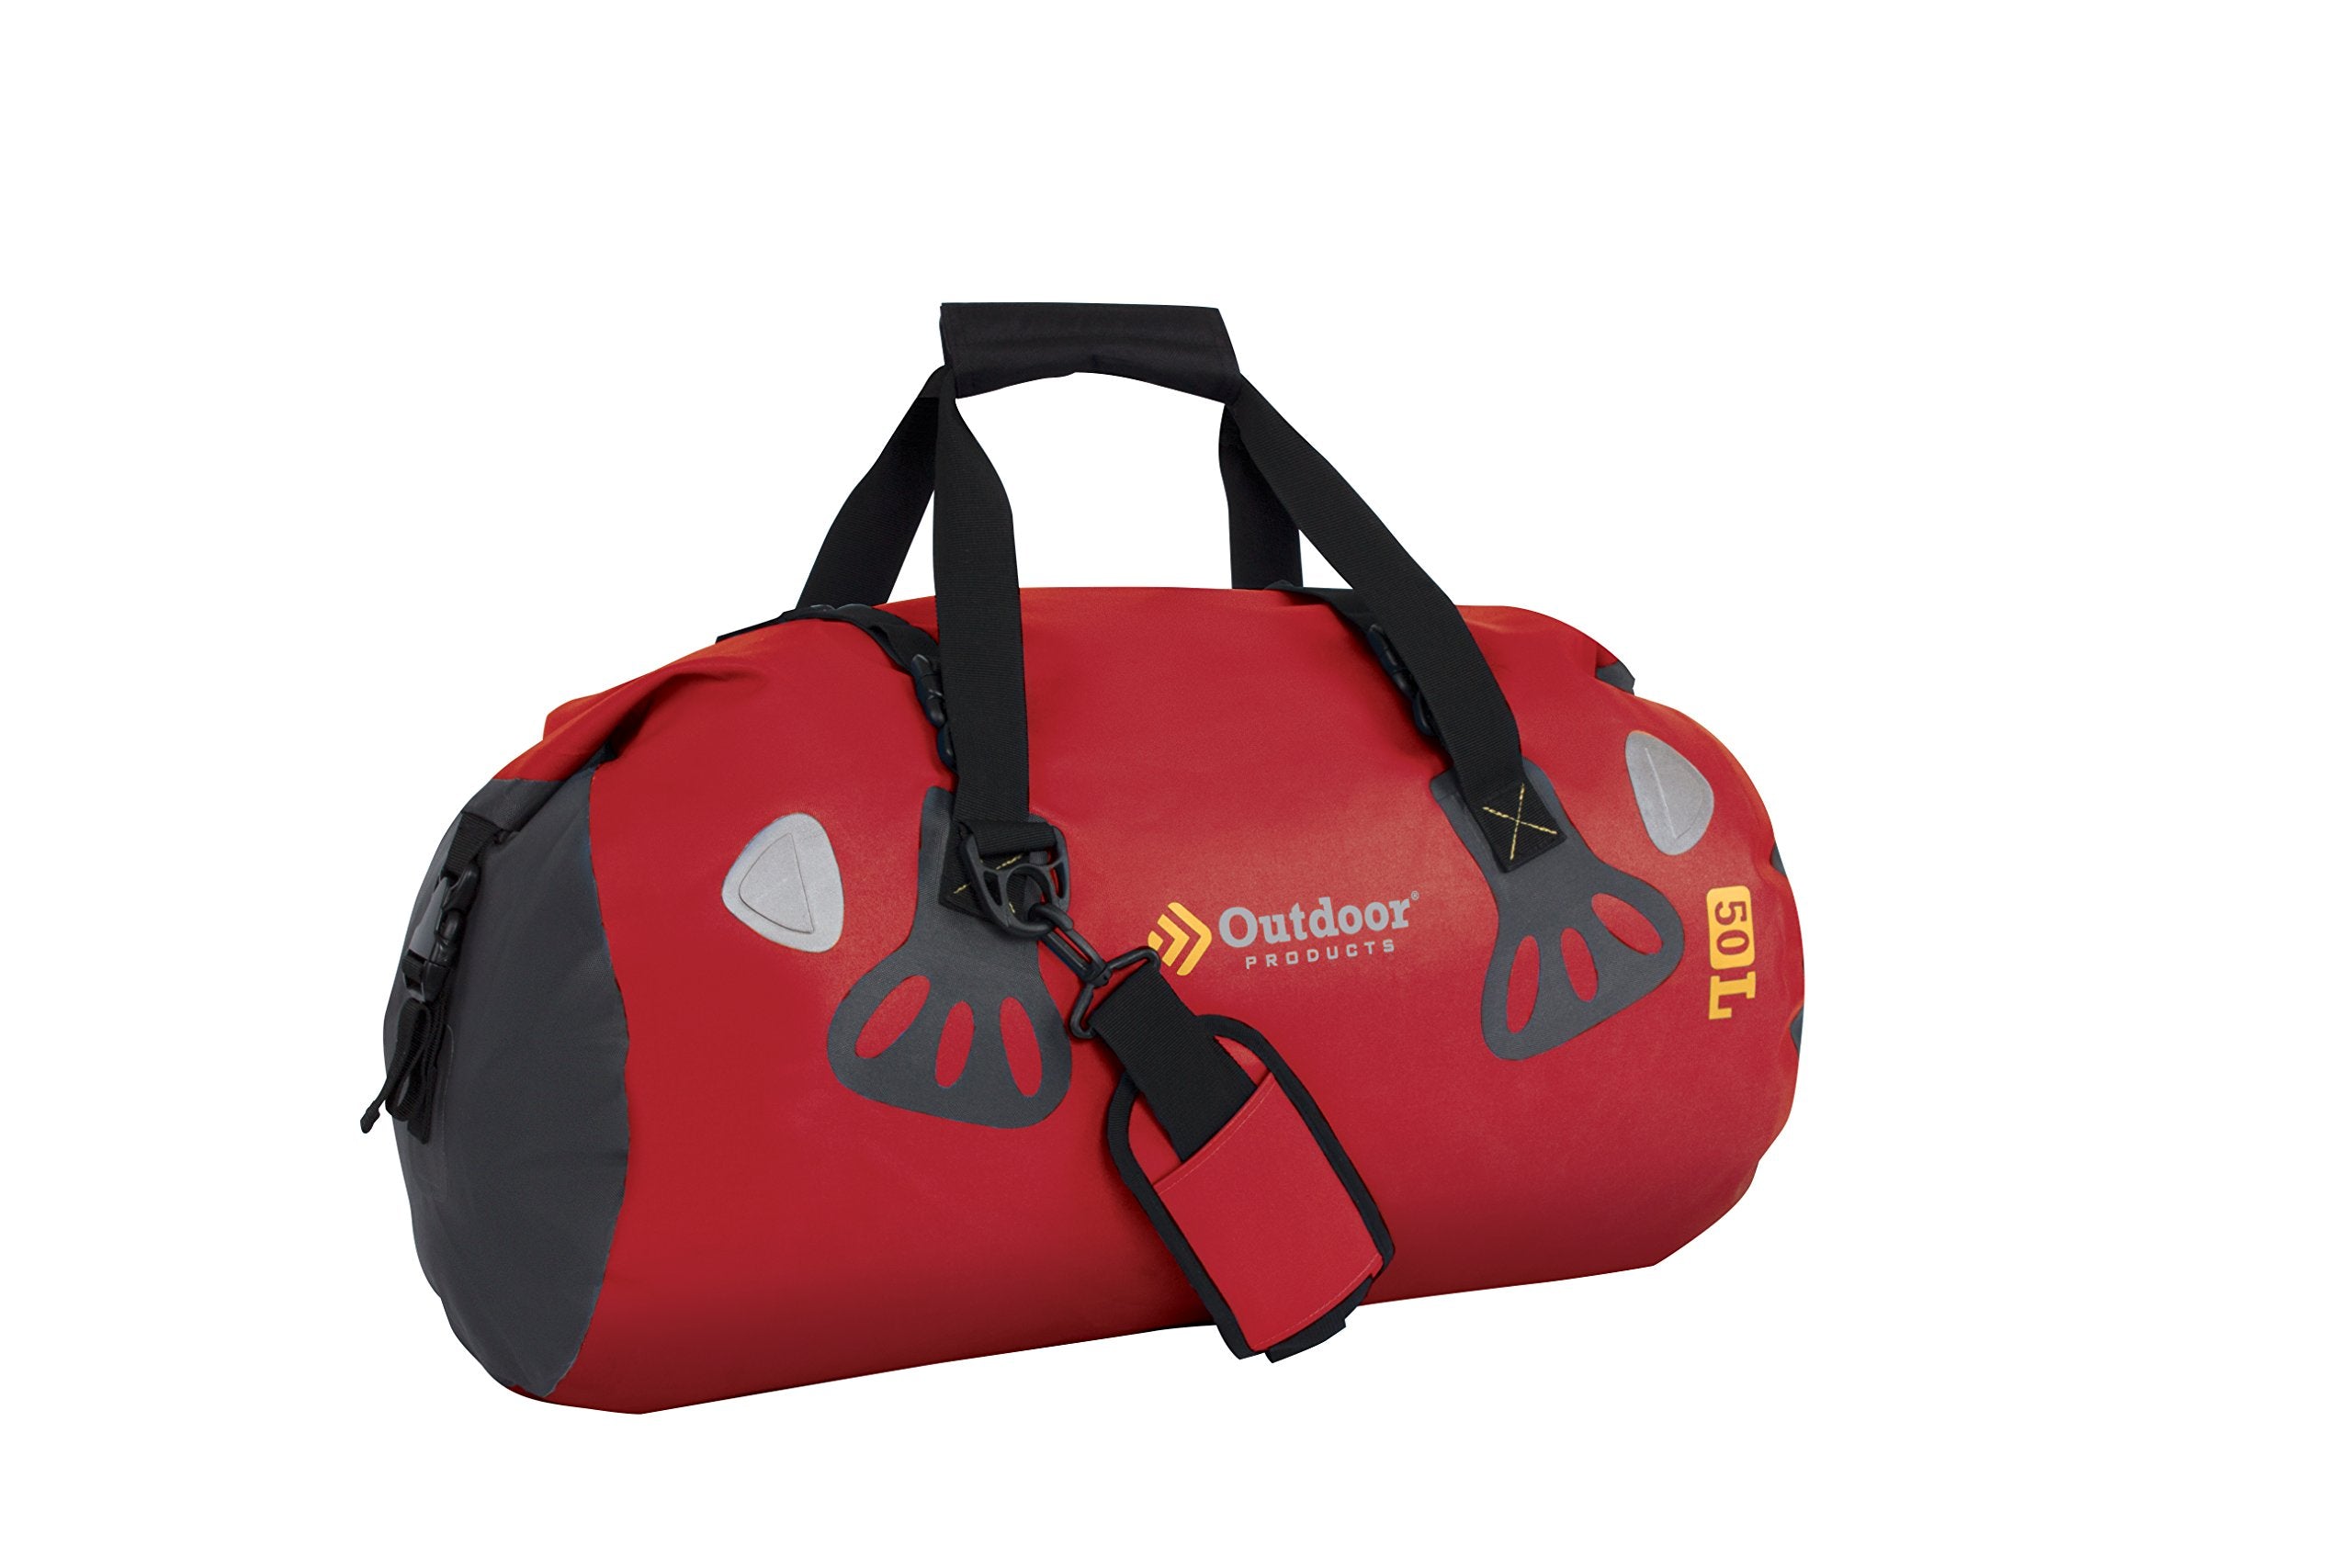 Buy Duffle Bag online at best prices Best Offers on Duffel bags in travel   ARMORO